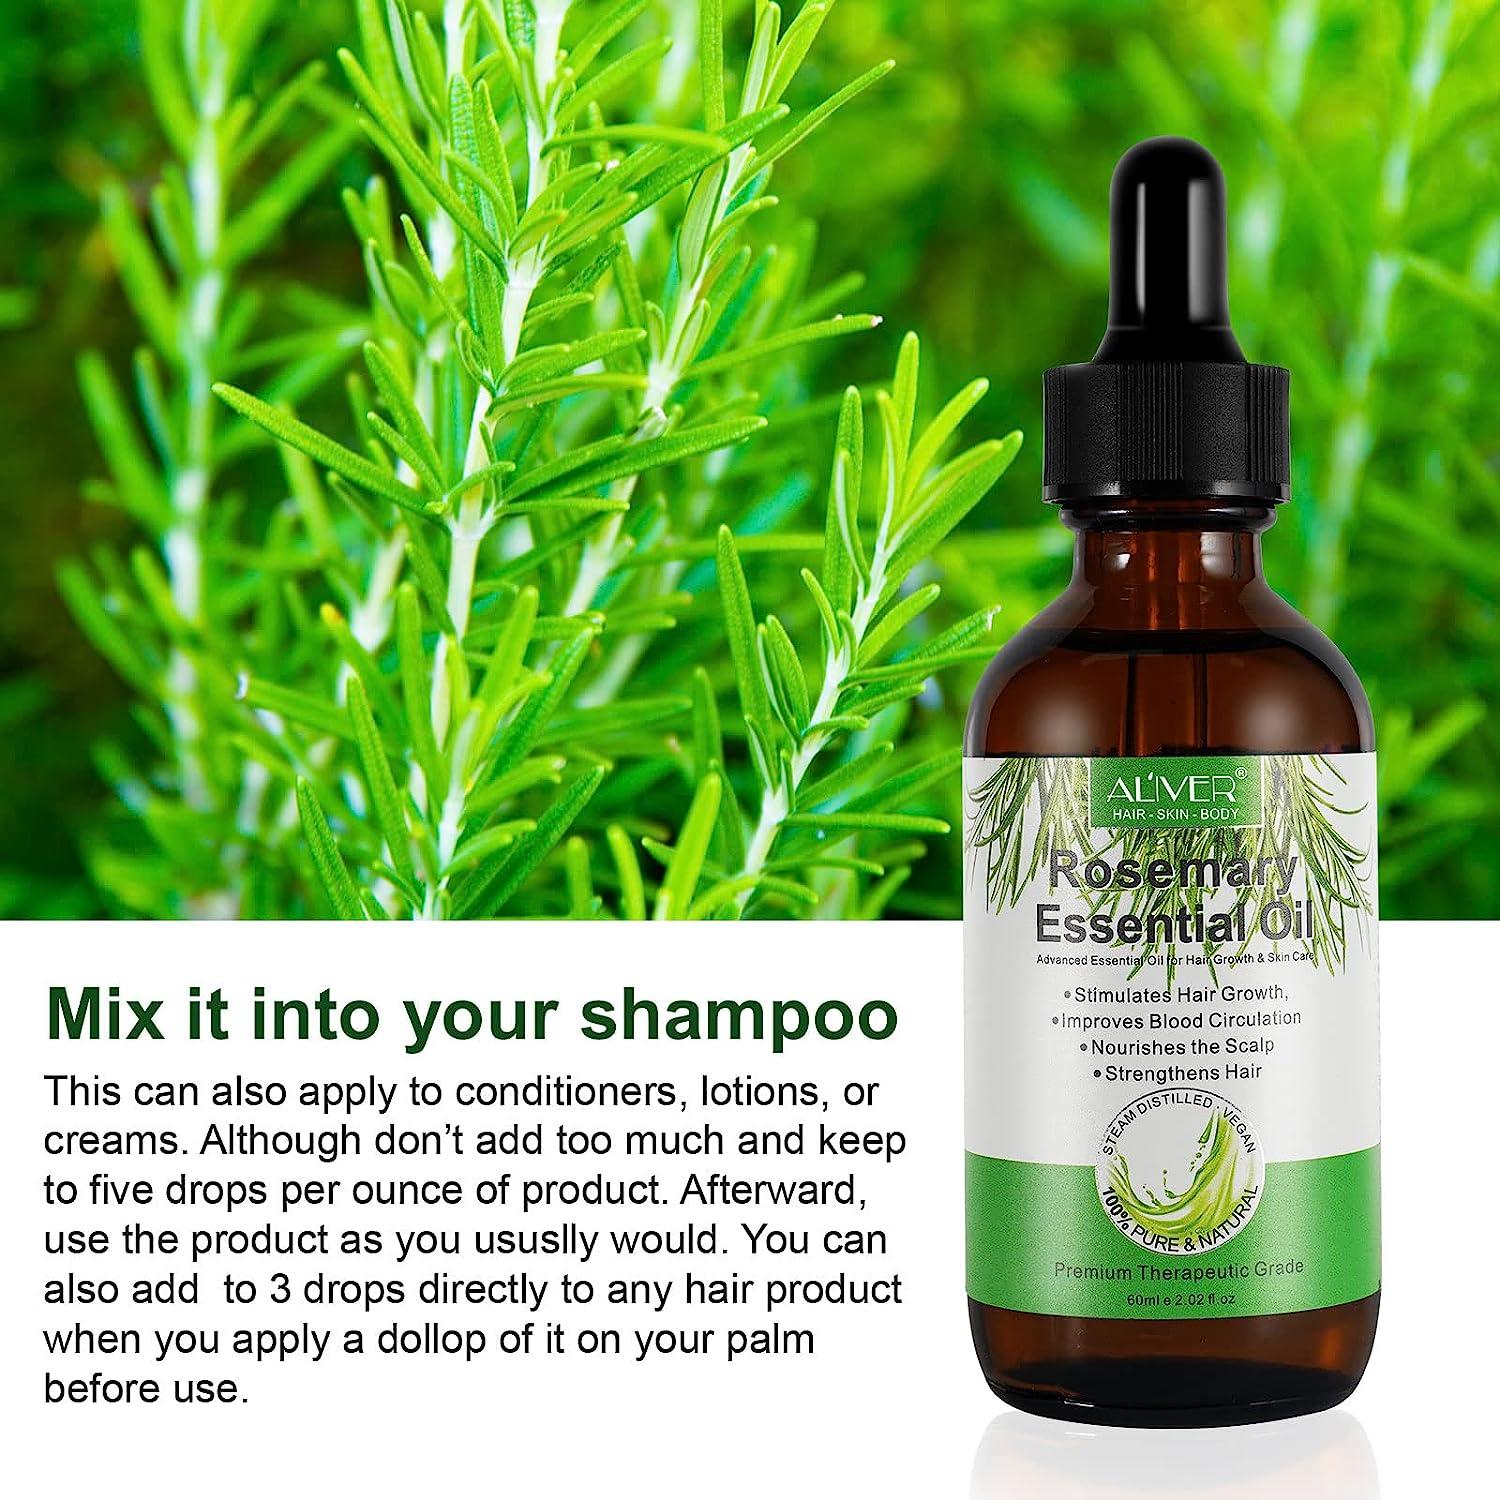 Rosemary essential oil, rosemary oil for hair growth and skin care, organic pure  rosemary oil for hair loss and dry damaged hair, nourishes the scalp and  stimulates hair growth